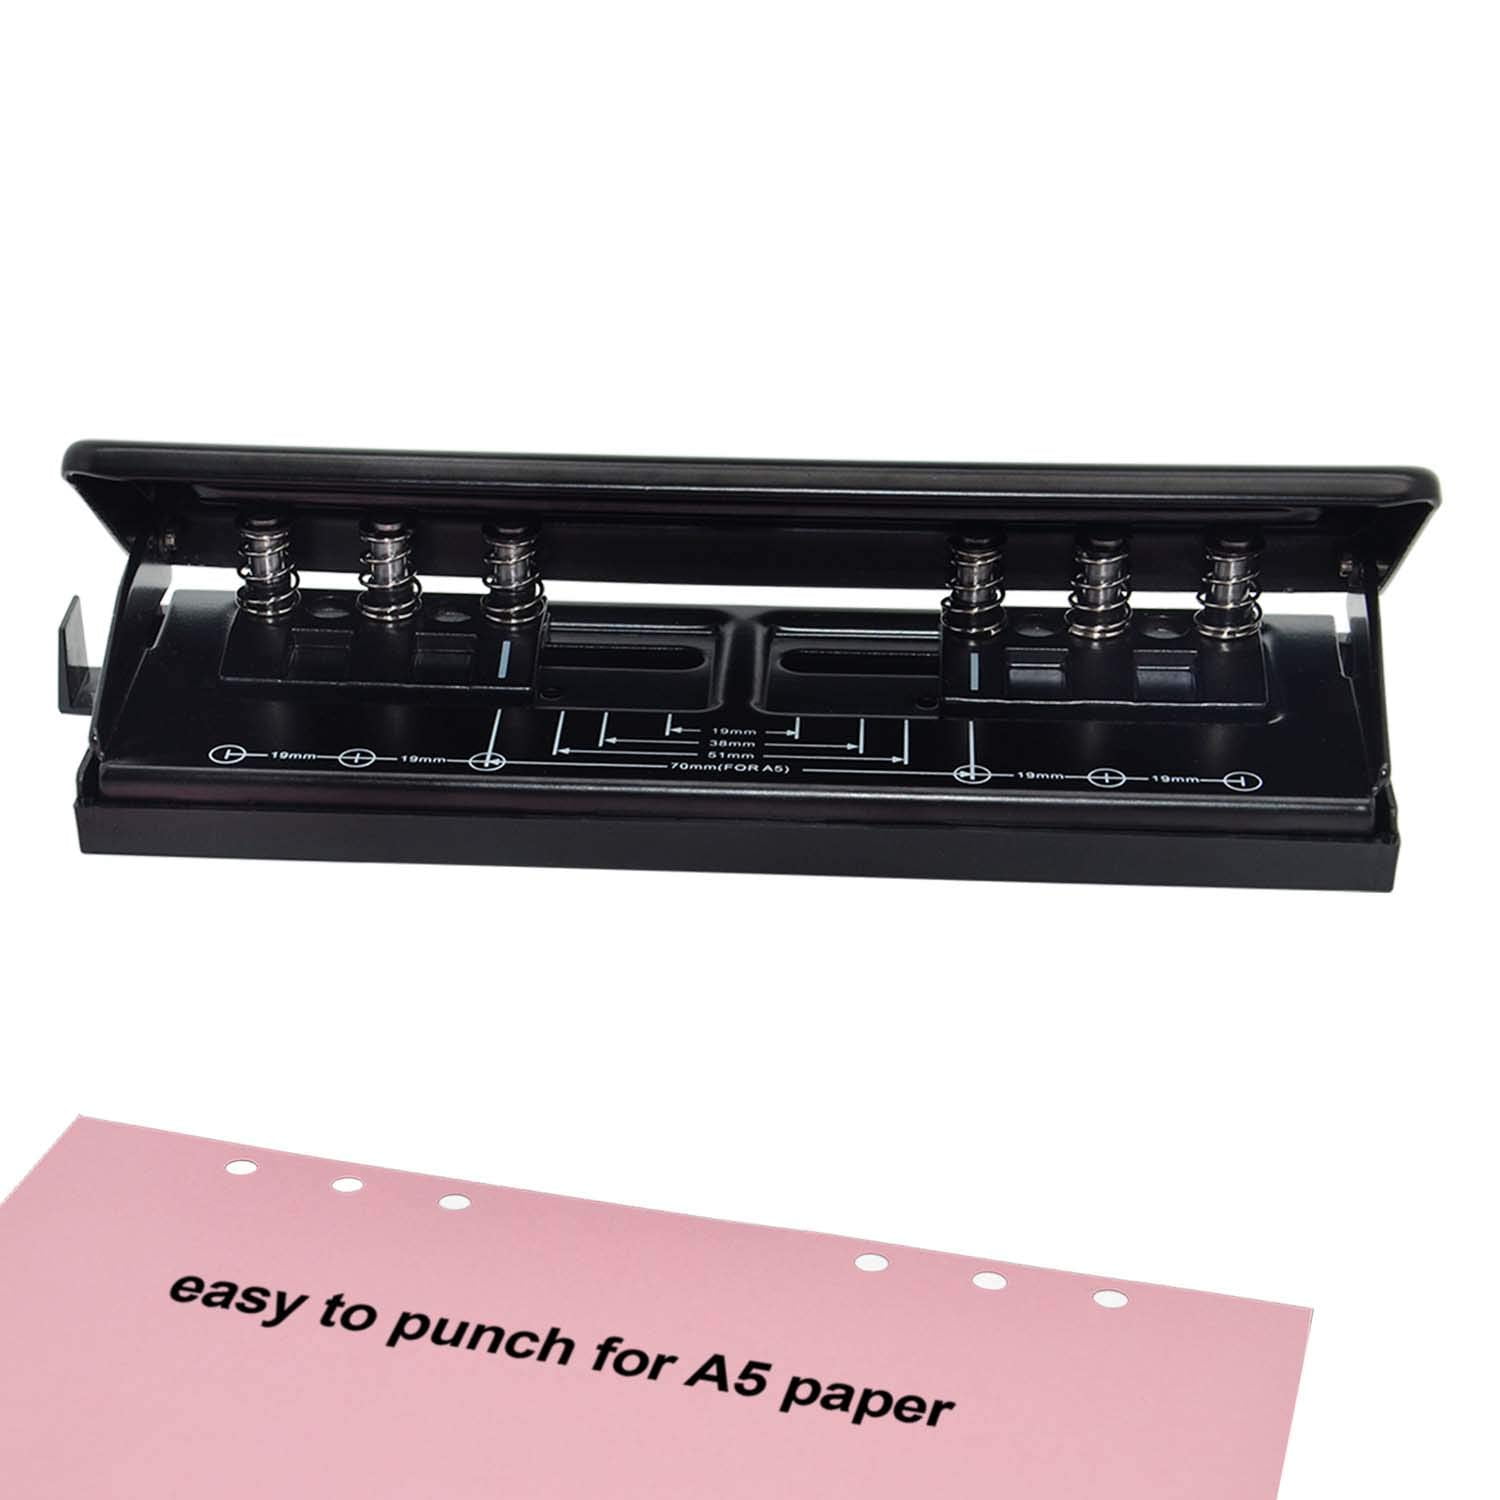 Carevas Adjustable 6-Hole Desktop Punch Puncher for A4 A5 A6 B7 Dairy  Planner Organizer Six Ring Binder with 6 Sheet Capacity